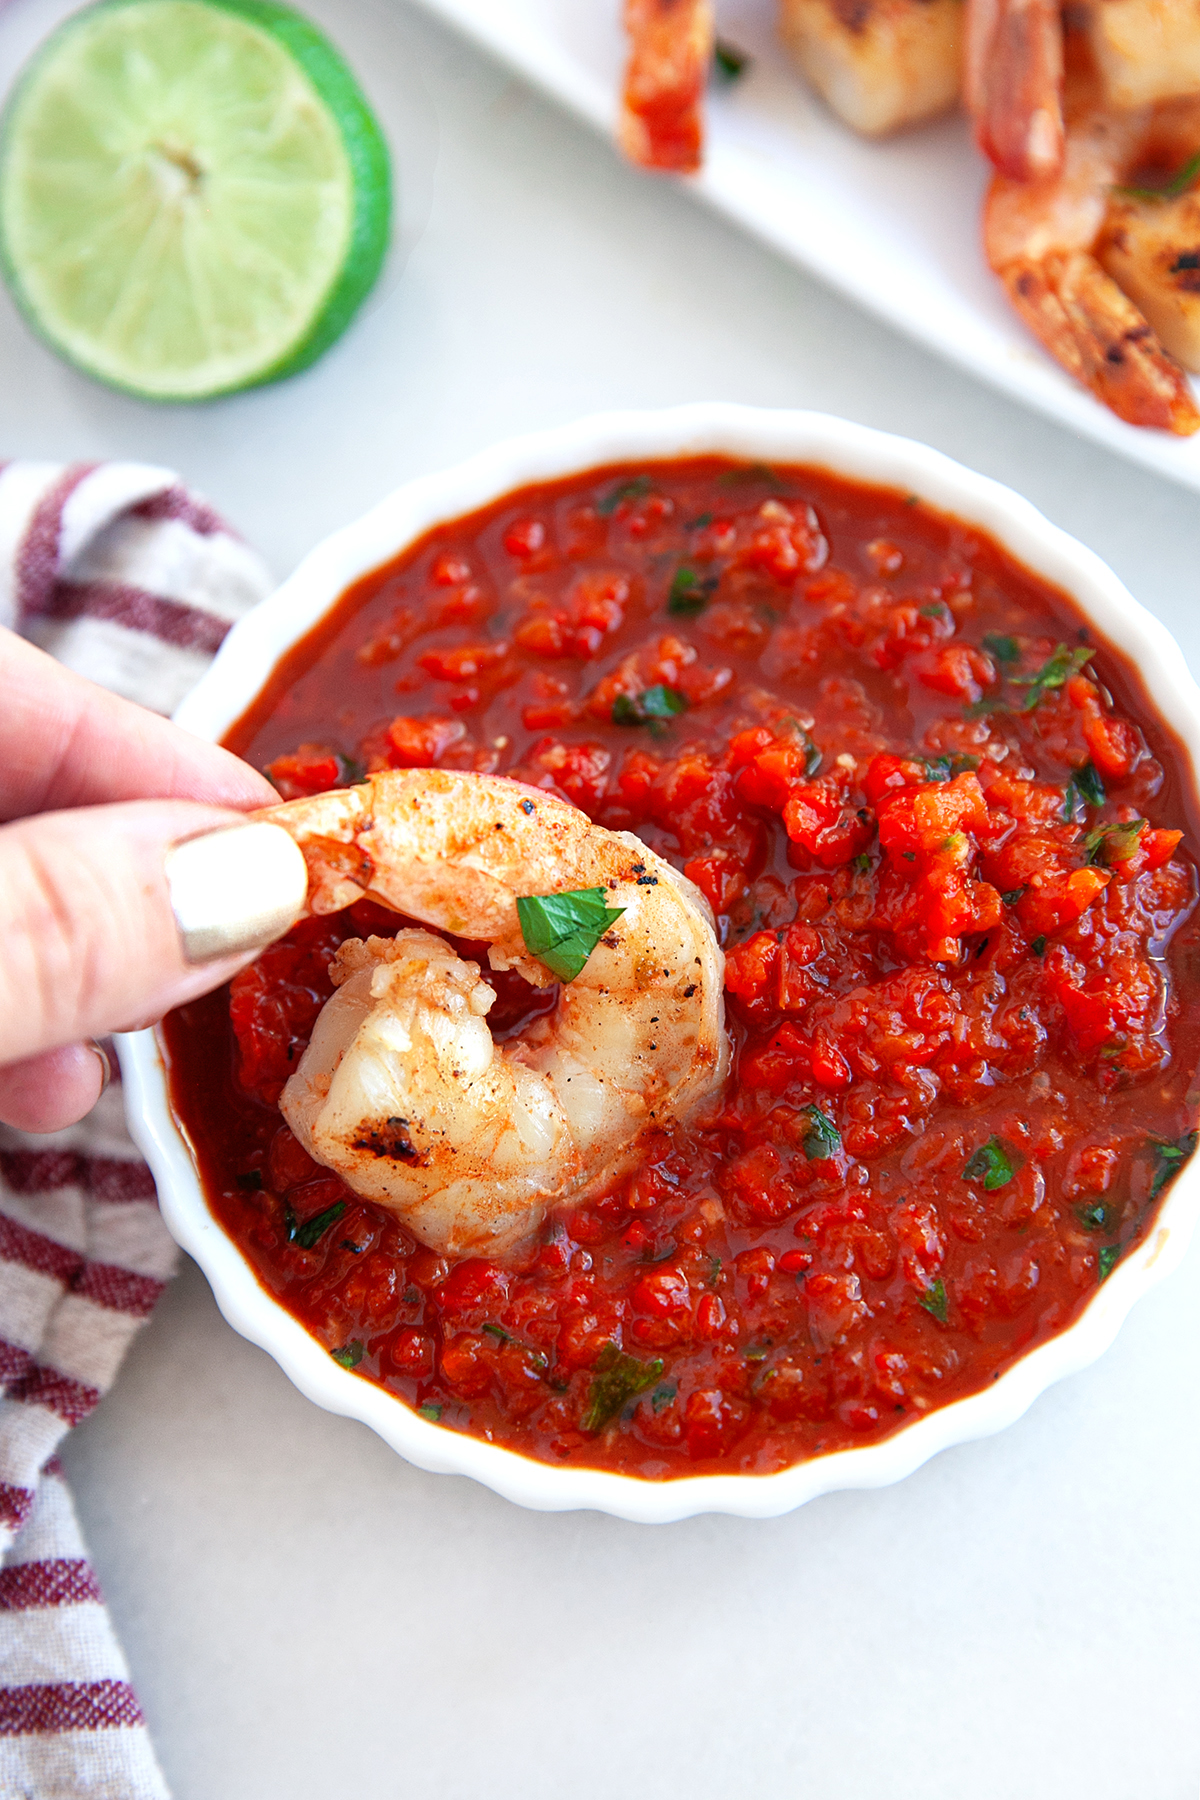 Grilled shrimp being dipped into a small bowl of red pepper sauce.